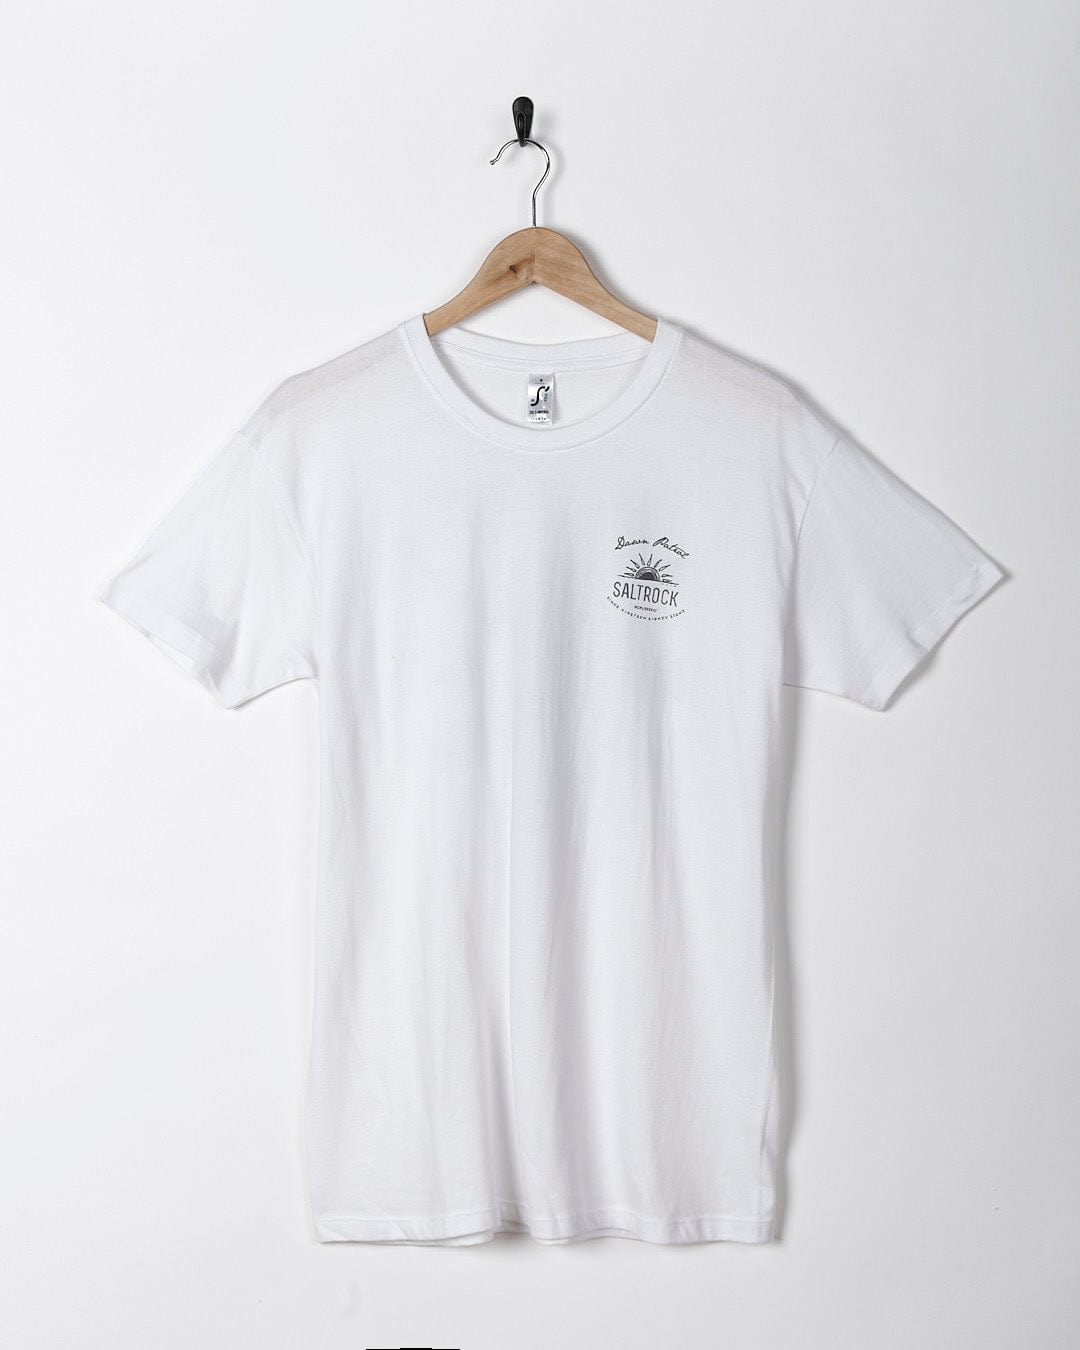 A Saltrock - Dawn Patrol Mens Short Sleeve T-Shirt - White with a small logo on it.